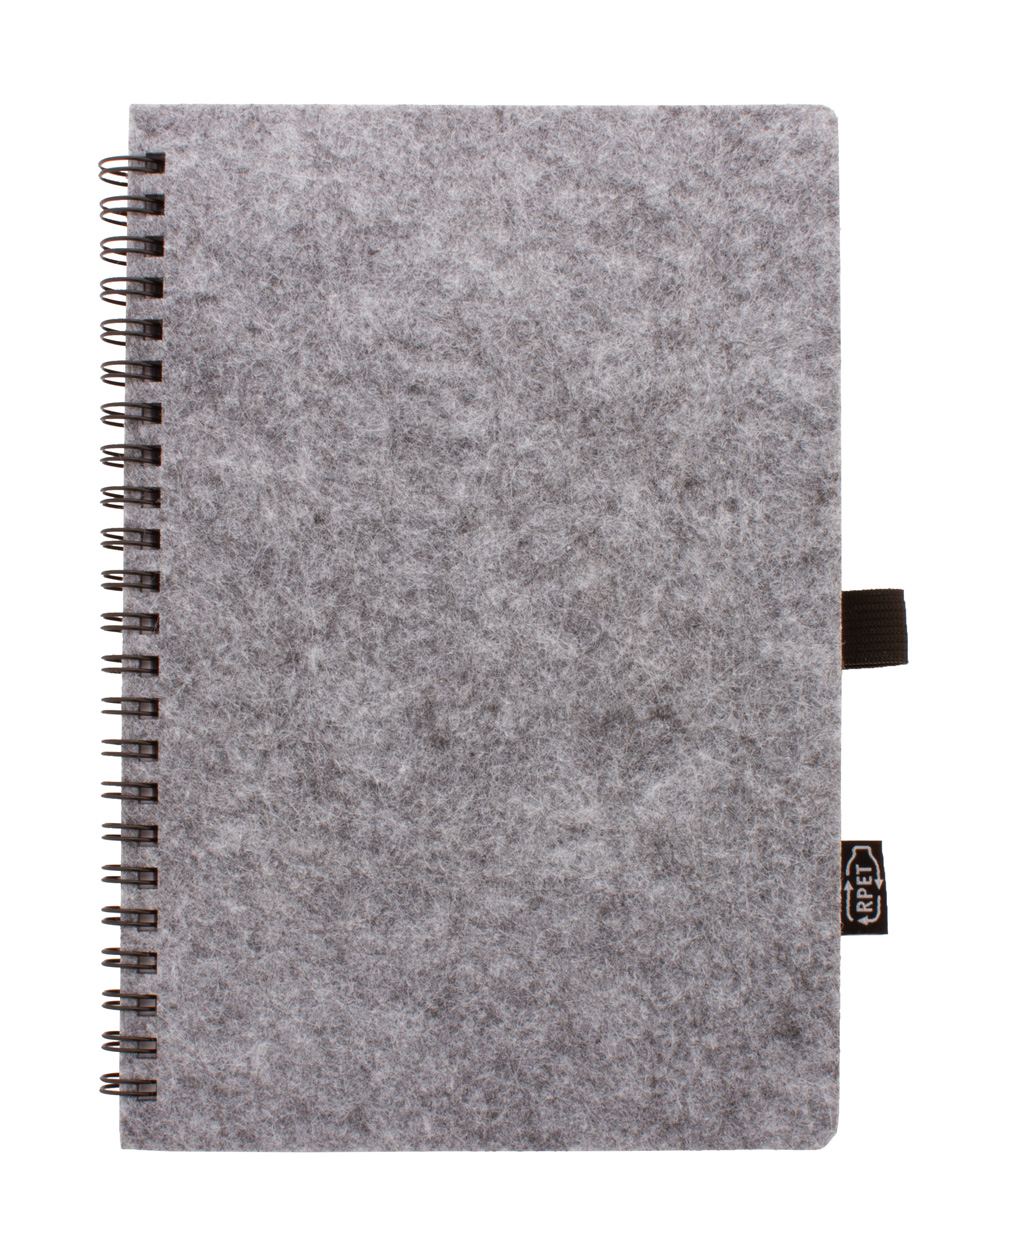 Notepad FELBOOK A5 made of recycled materials - grey